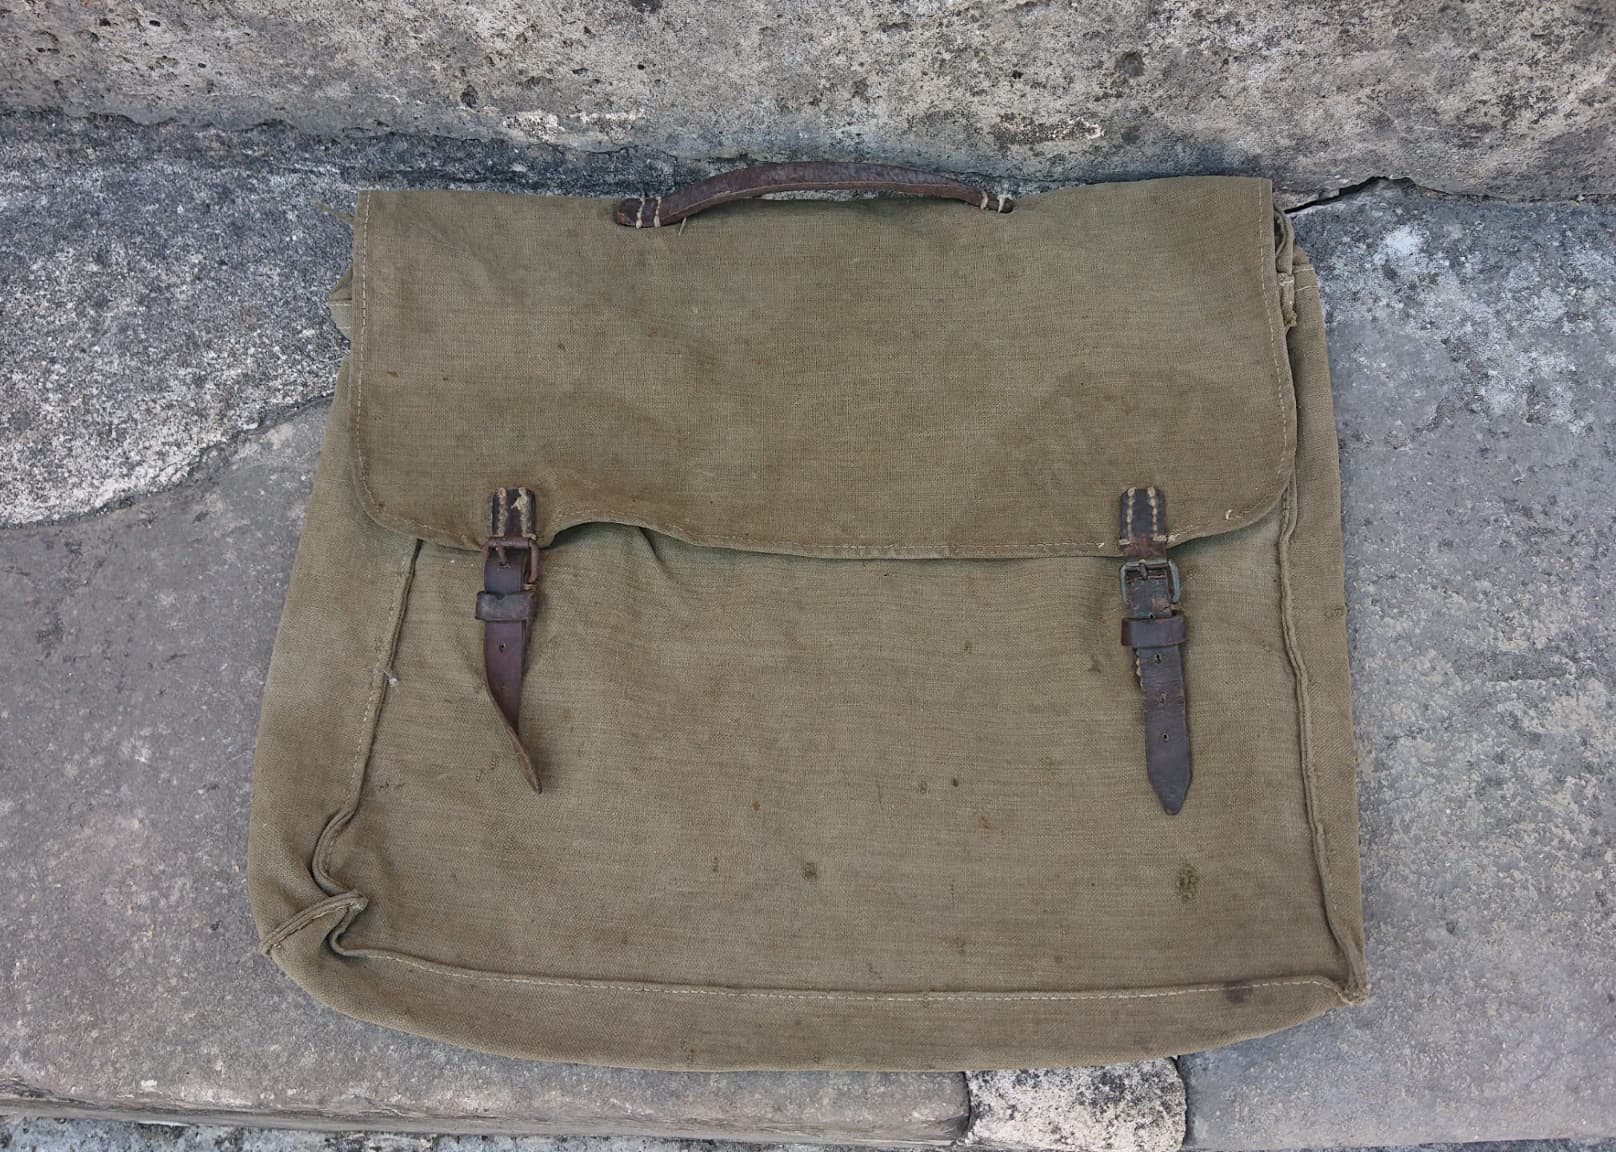 militaria : Sac effets personnels m31 / m31 personal effects bag